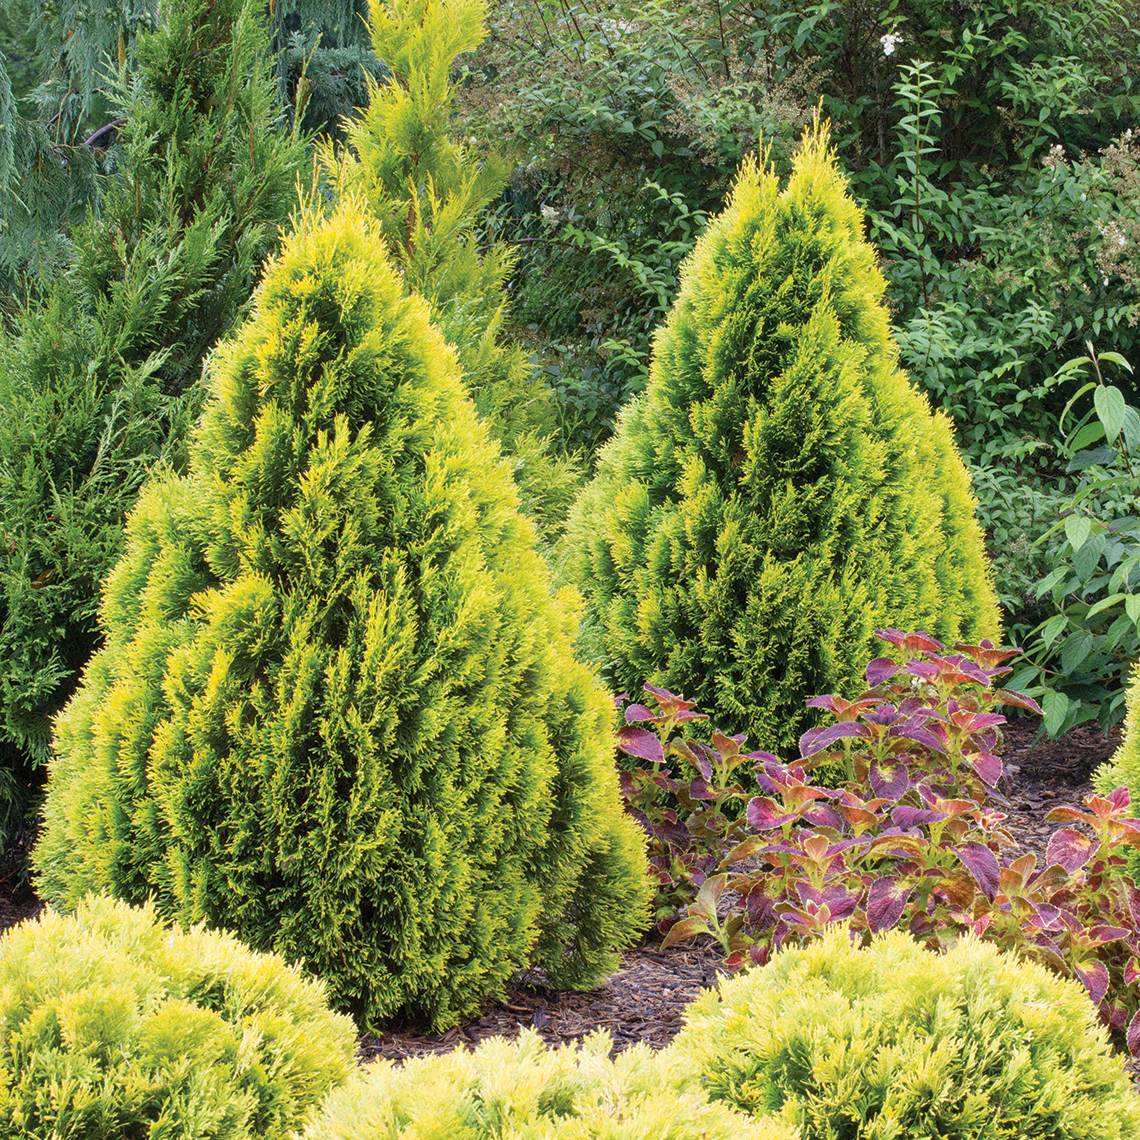 Two specimens of dwarf golden Filips Magic Moment arborvitae in a landscape surrounded by other evergreens